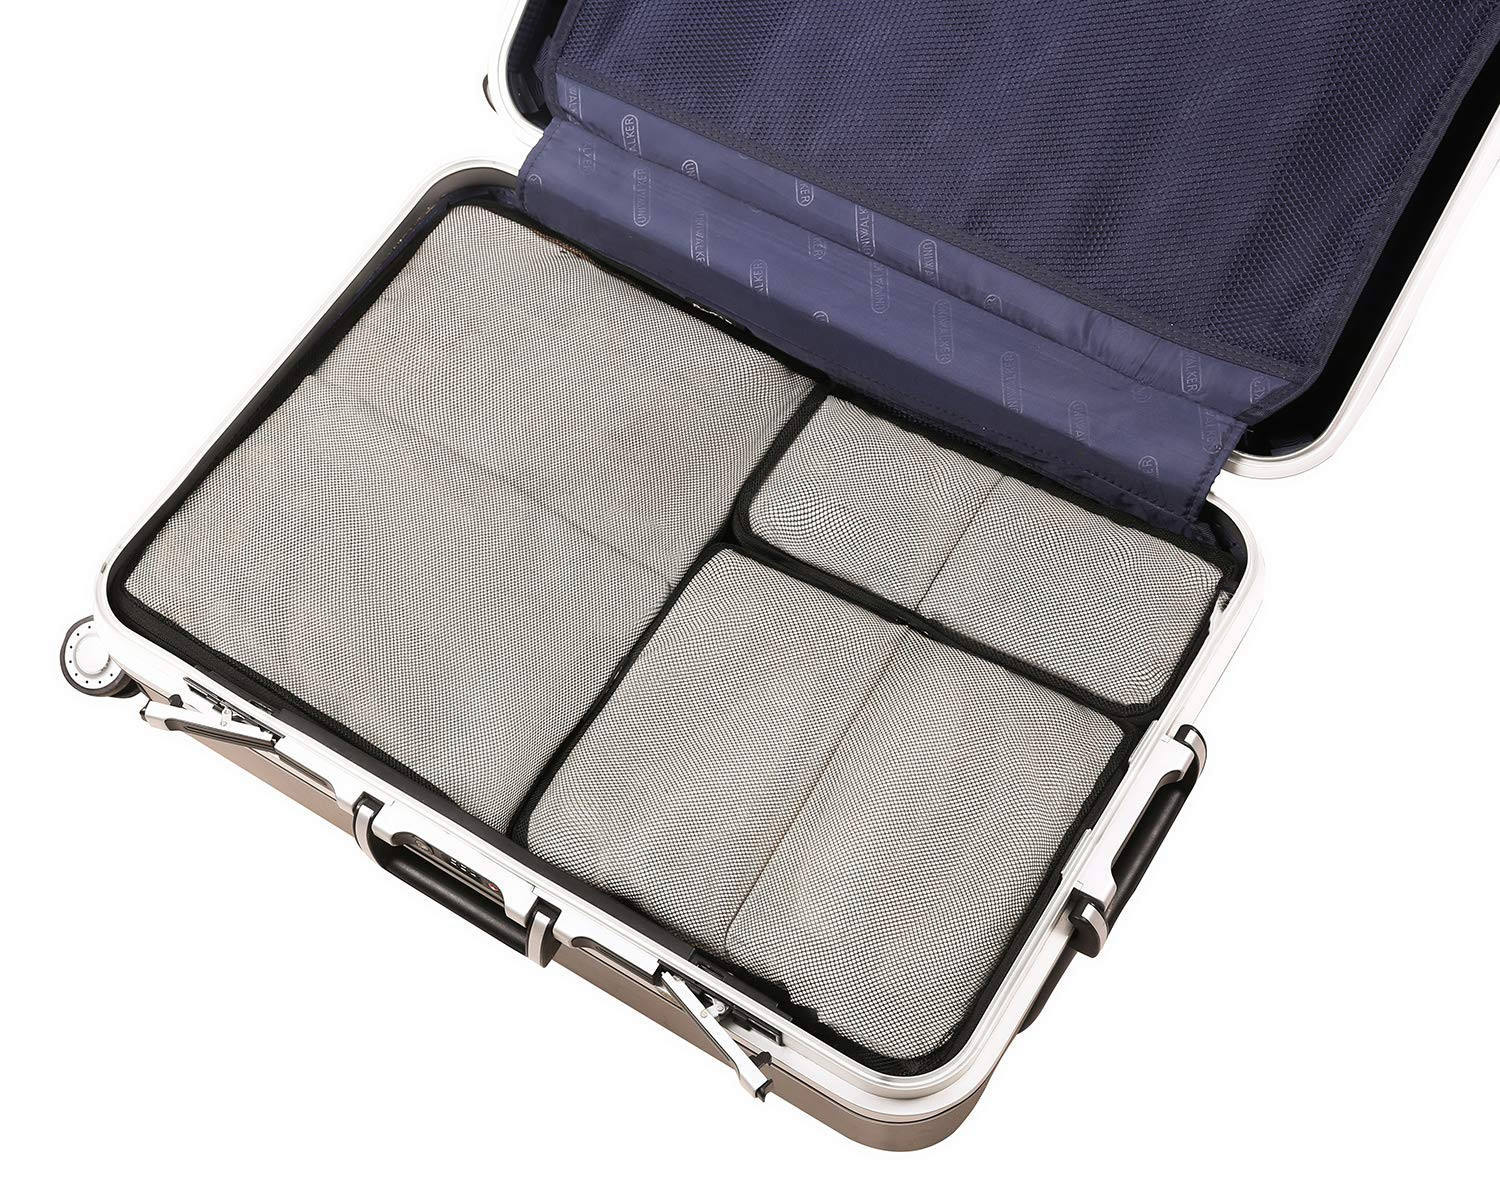 Various Sizes 6 Set Packing Cubes Travel Luggage Packing Organizers Compression Bags For Travel Luggage